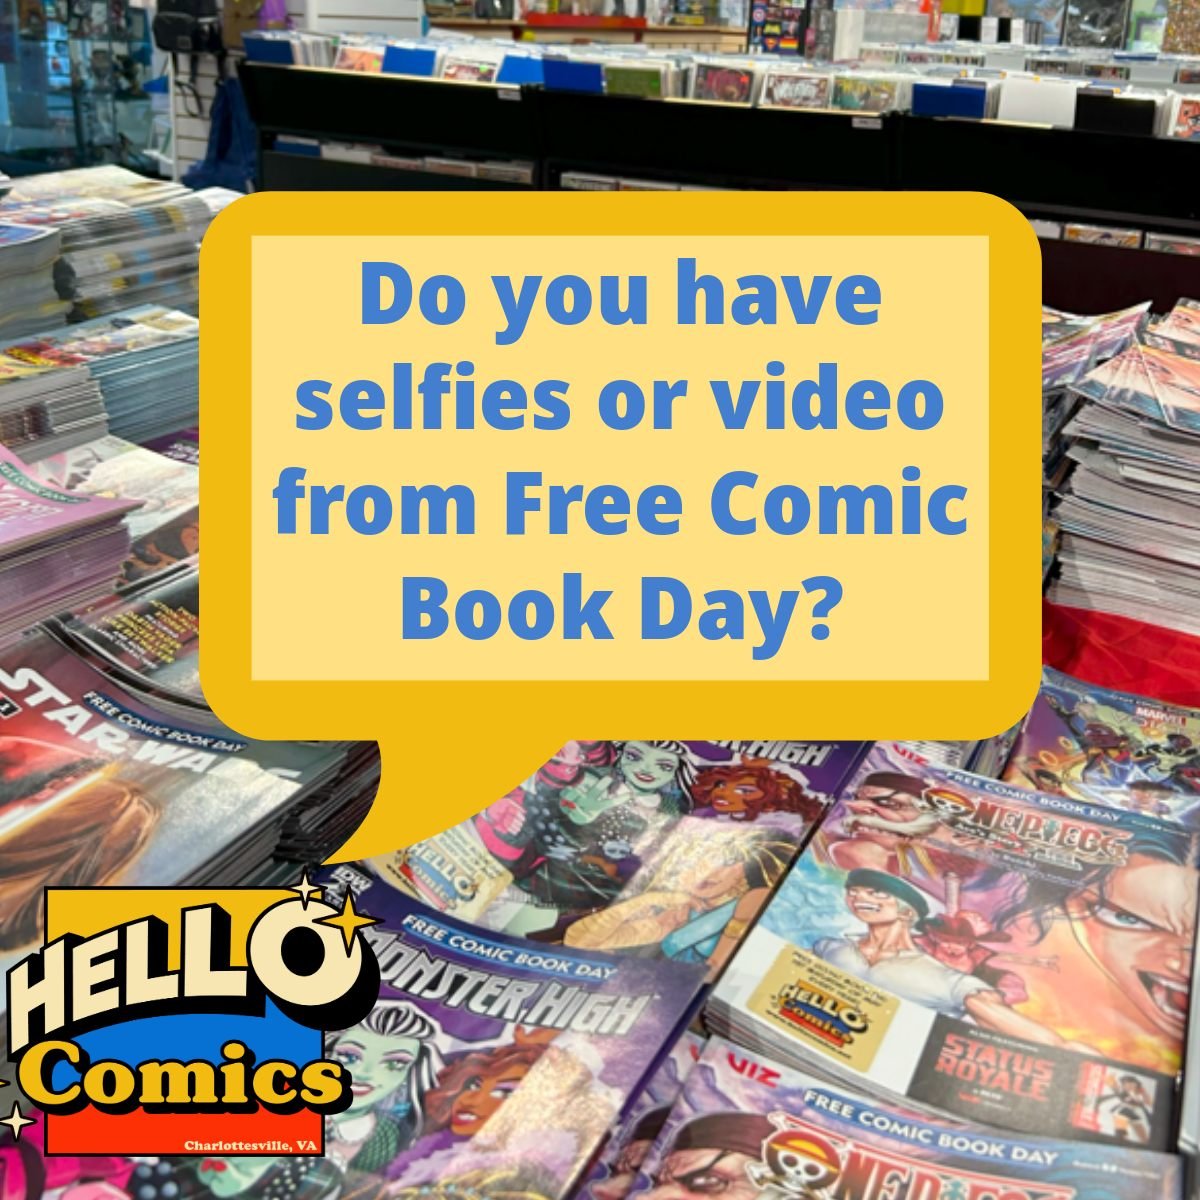 Please consider sharing your selfies and videos! Why? We've been nominated for an award and need to send in a video about our shops - Pictures from ya'll would help make it extra special.  Thanks so much!  email: sayhello@hellocomics.net.